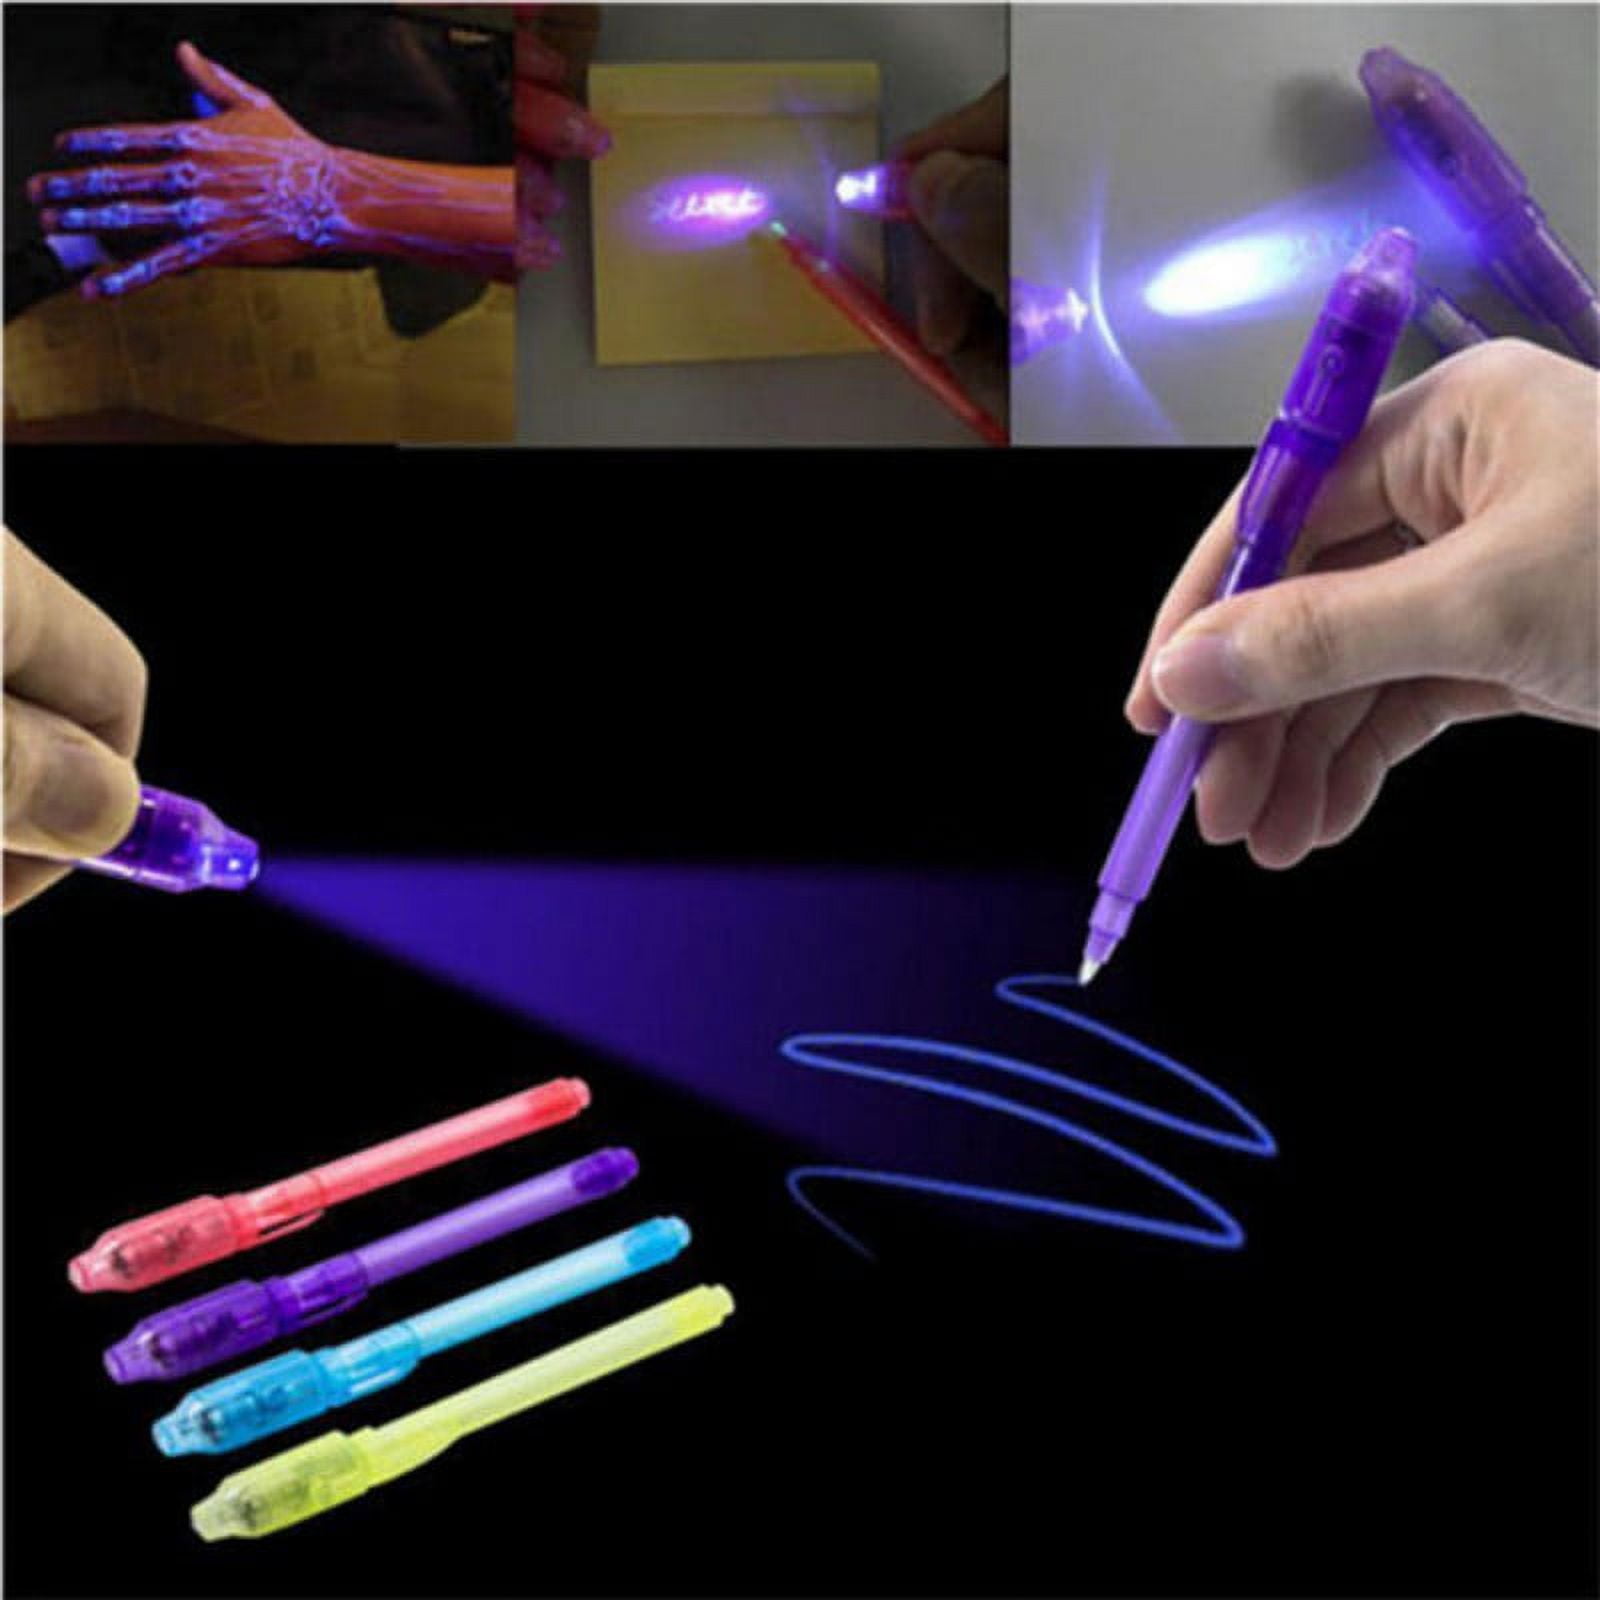 CUSTOMIZE123 Personalized Invisible Disappearing Ink magic Pen, Custom  Secret Spy activity Pen with UV Light for Kids, ages 8-12 Party Favors,  kids